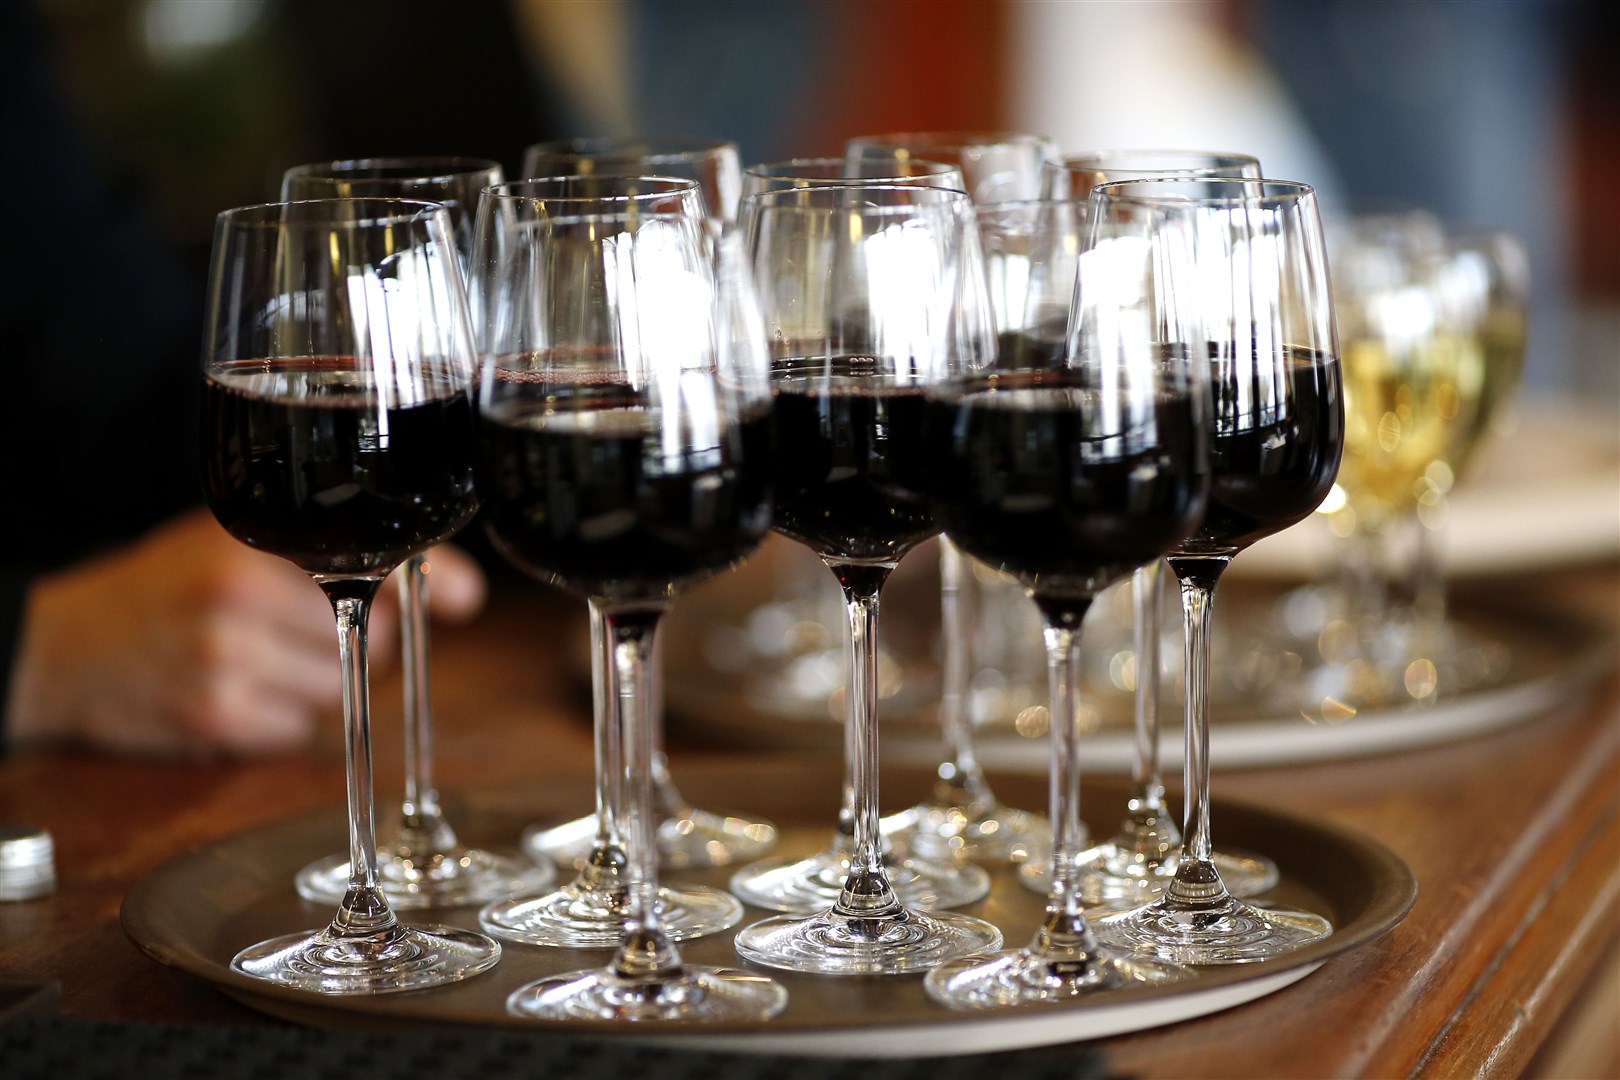 Not all red wines have the same effect, researchers found (Archive/PA)